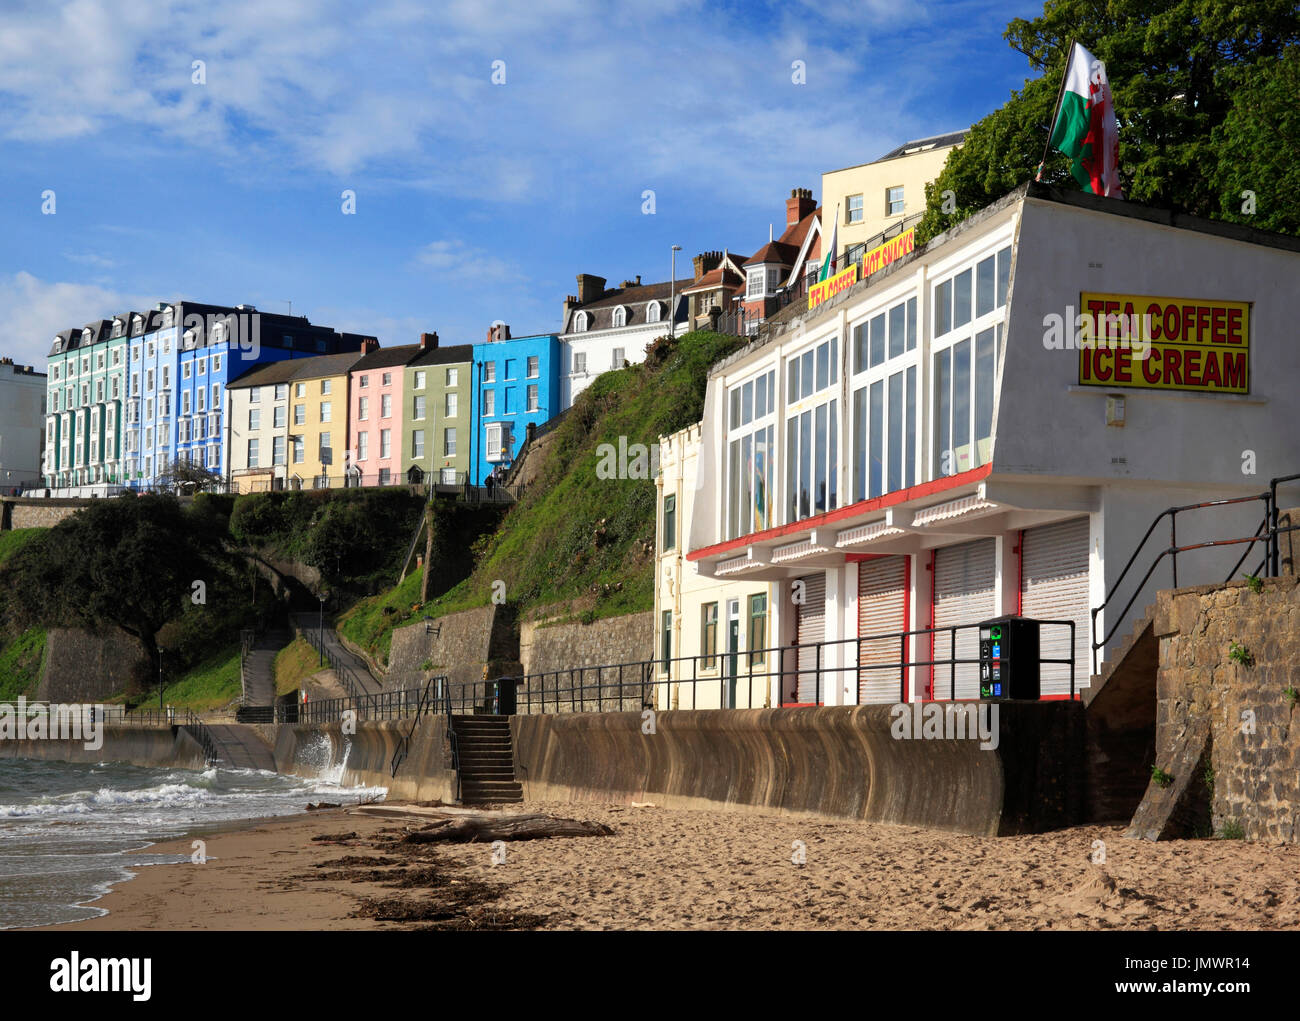 Cafe on Tenby's North Beach, Tenby, Pembrokeshire, Wales, Europe Stock Photo